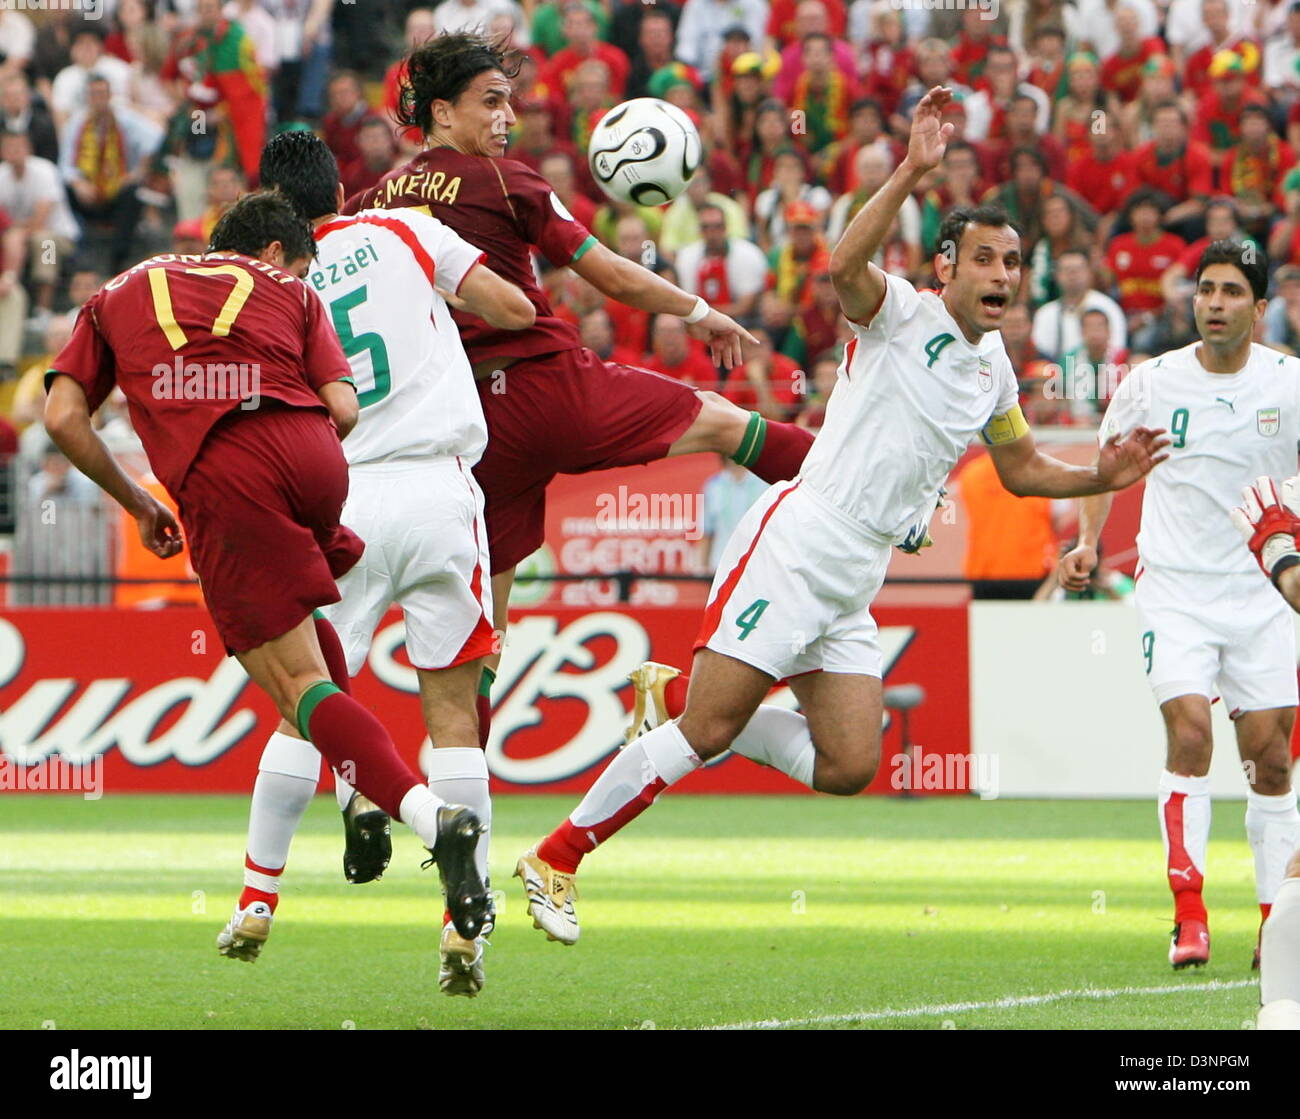 Cristiano Ronaldo (L) of Portugal takes a header on the goal during the 2006 FIFA World Cup group D match of Portugal vs Iran in Frankfurt, Germany, Saturday 17 June 2006. Behind him (L-R) Rahman Rezaei of Iran, Fernando Meira of Portugal, and Yahya Golmohammadi of Iran fight for the ball. DPA/BERND WEISSBROD+++ Mobile Services OUT +++ Please refer to FIFA's Terms and Conditions ++ Stock Photo